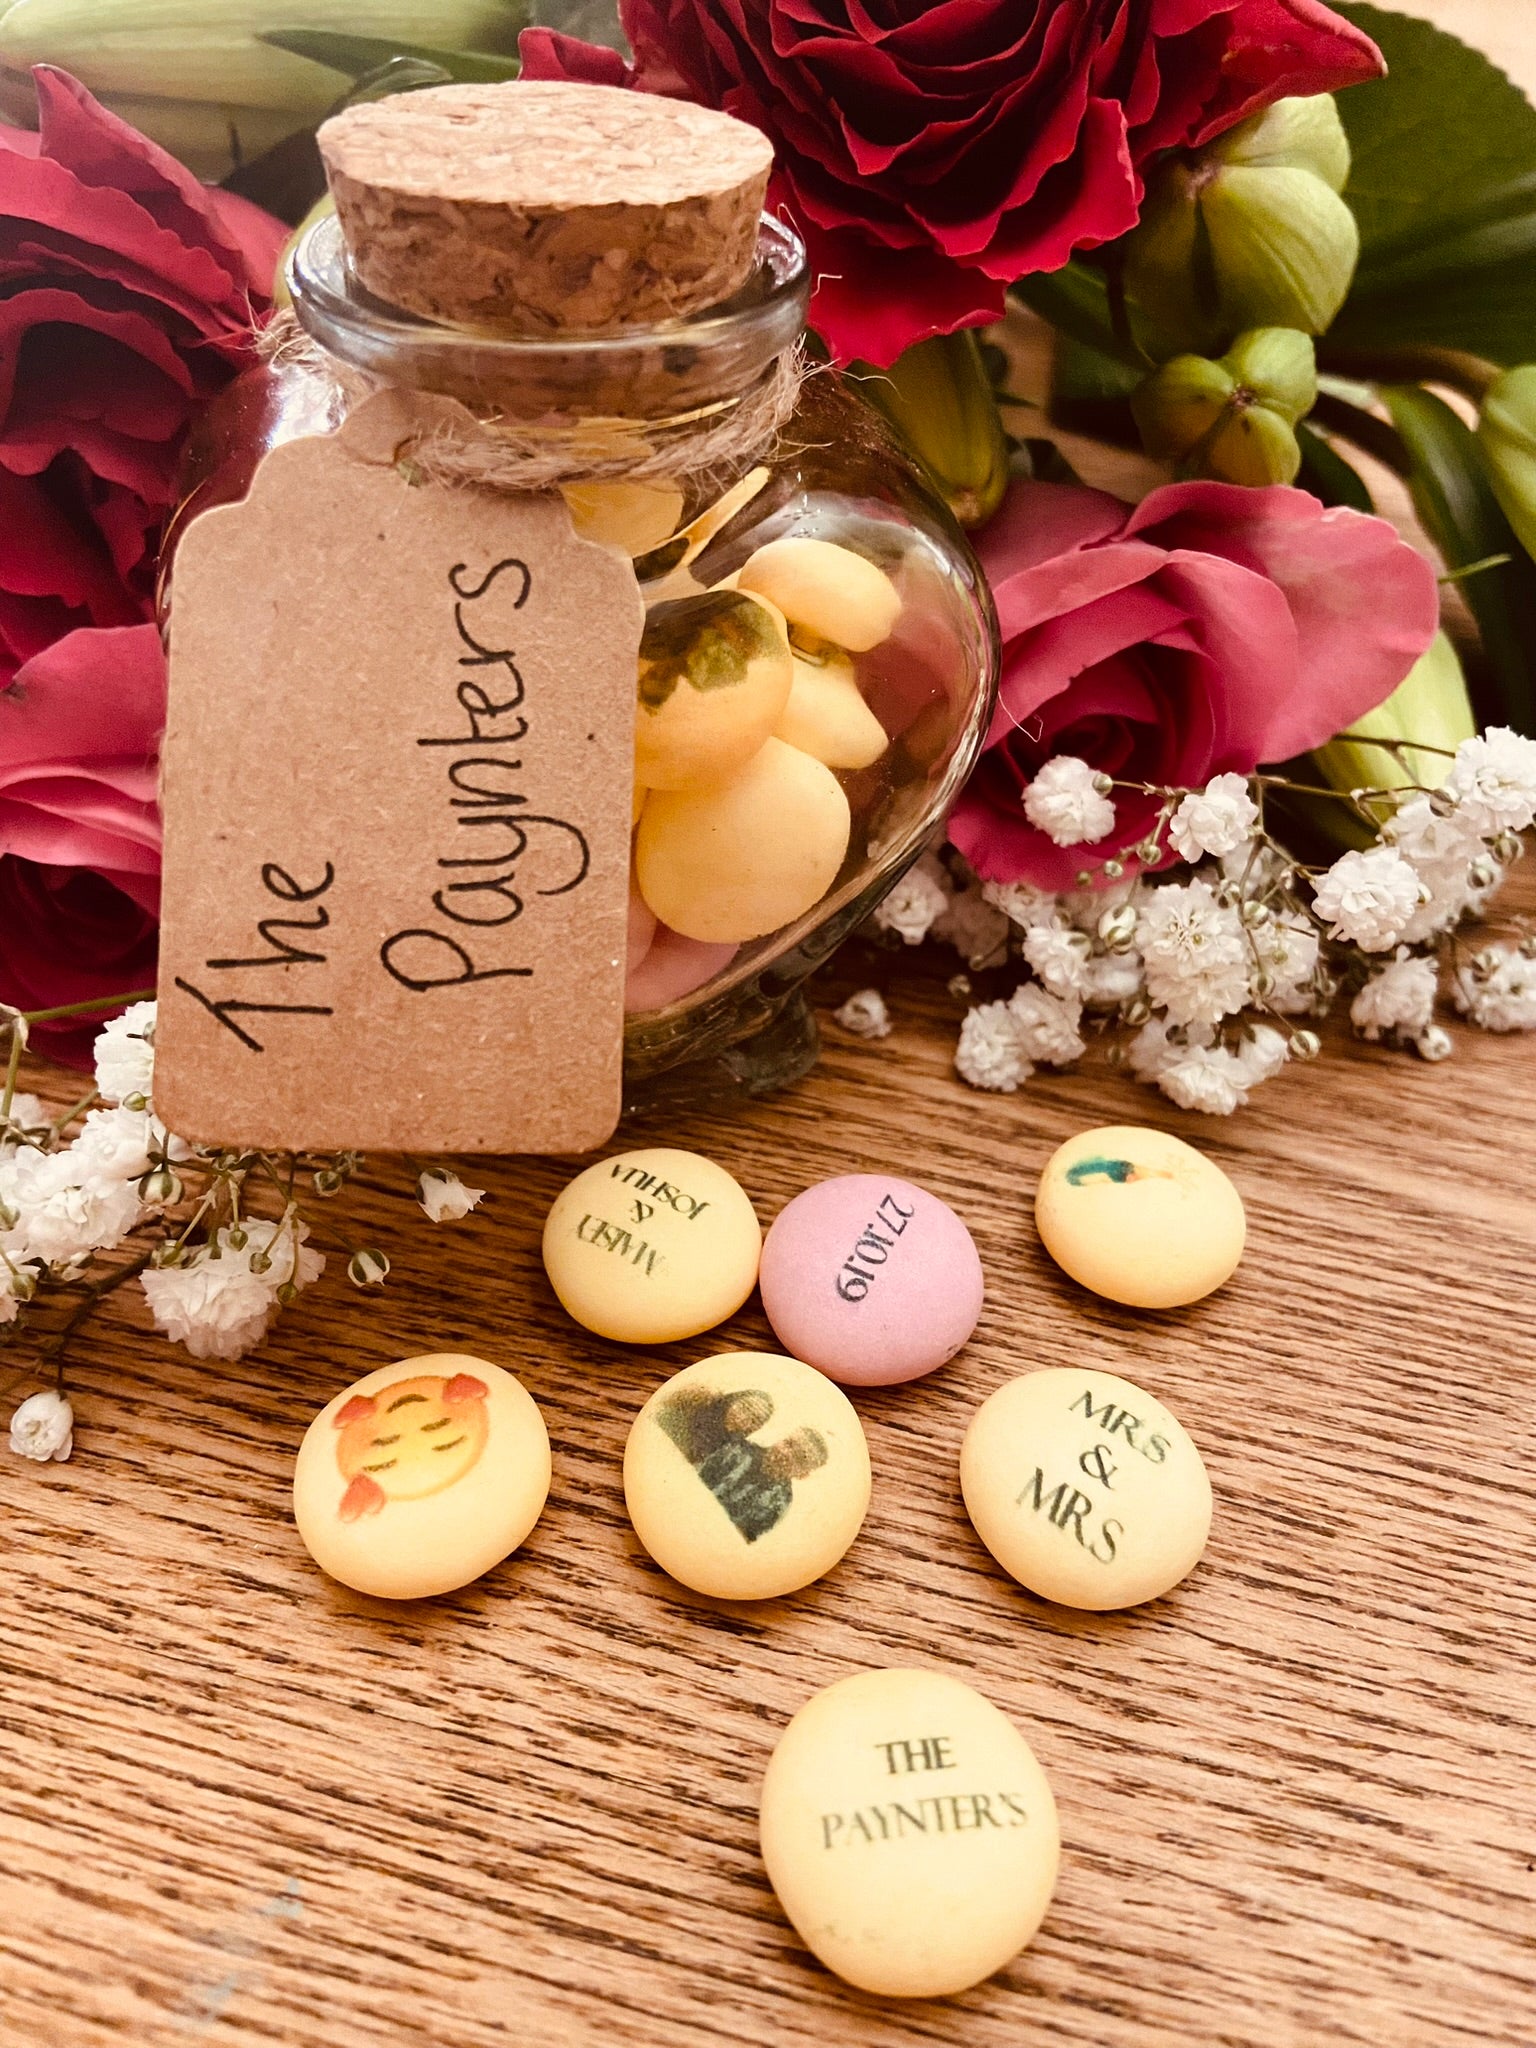 Personalised printed wedding favour sweets – PersonalisedYourSweets